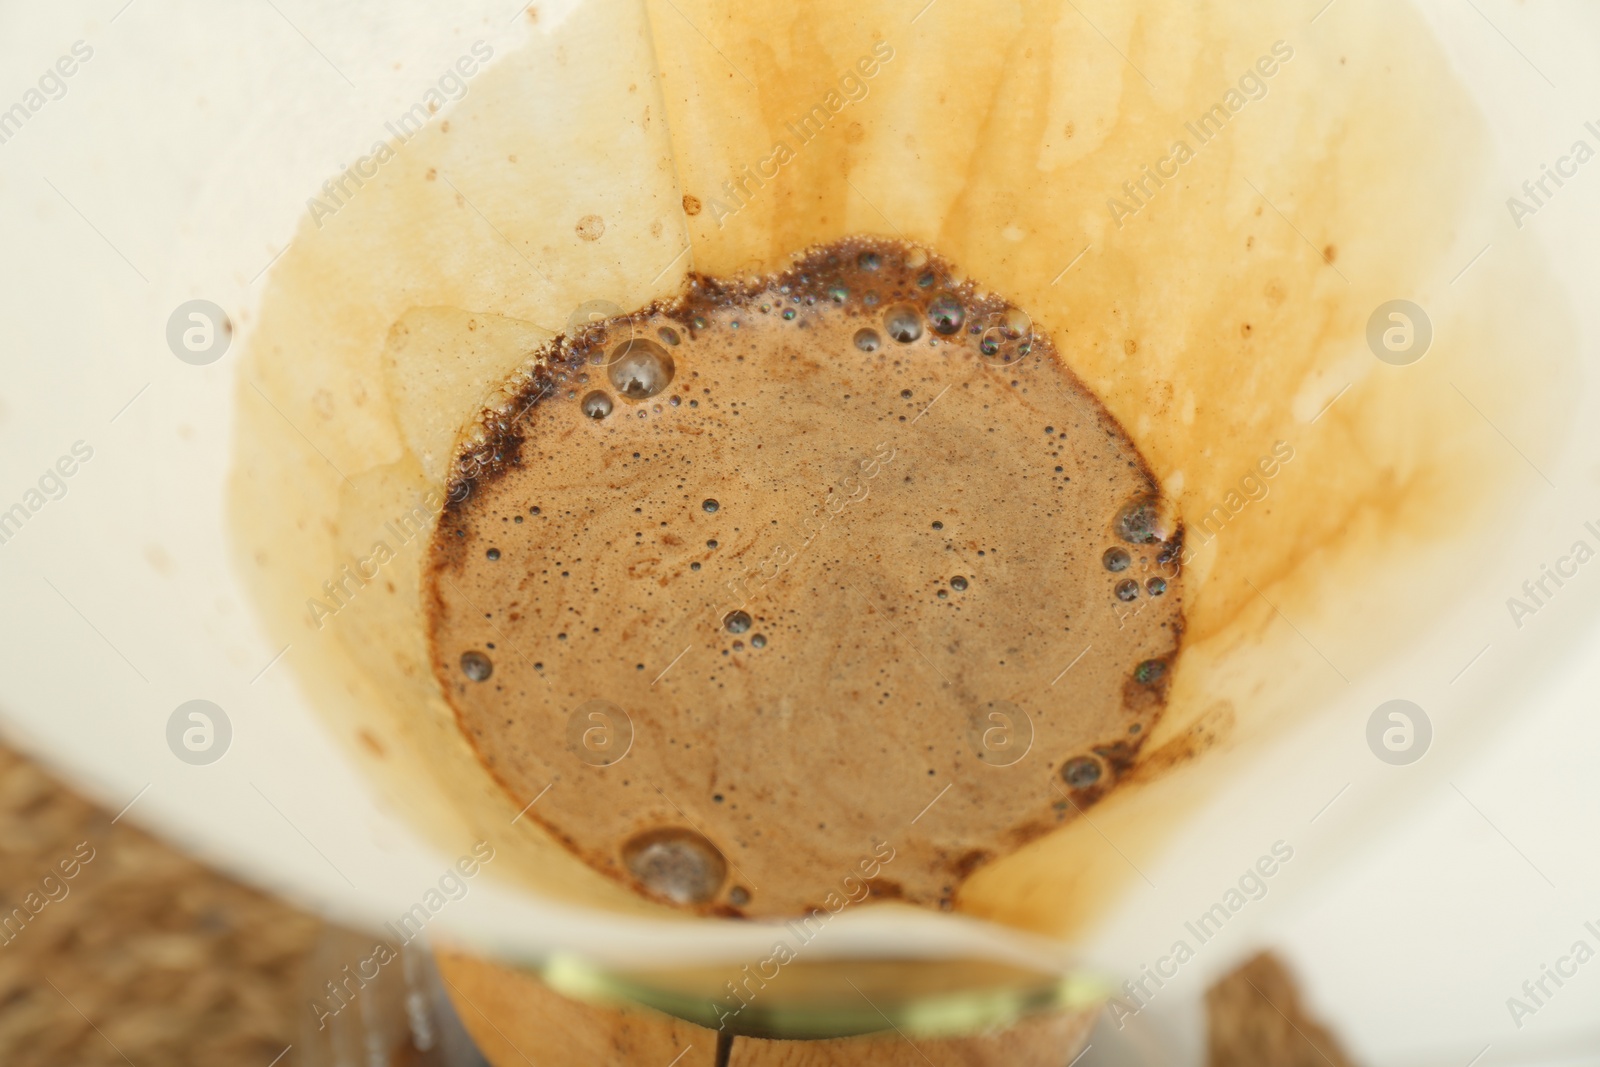 Photo of Paper filter with aromatic drip coffee in glass chemex coffeemaker, closeup